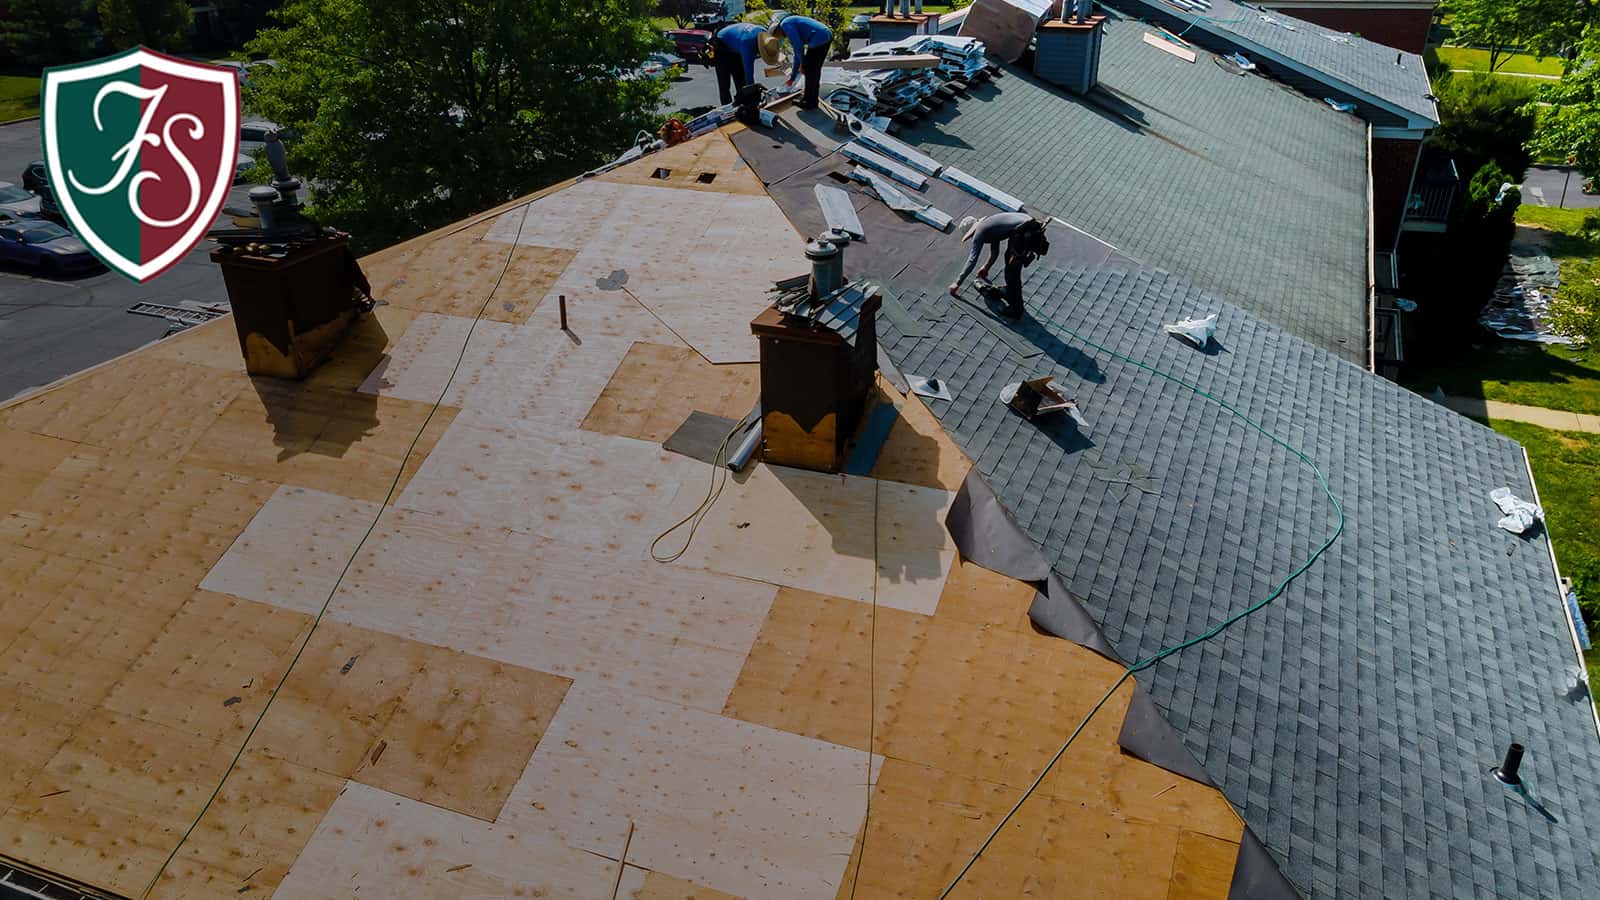 You want your roof to last as long as possible. Use these four tips to extend your roof’s life.